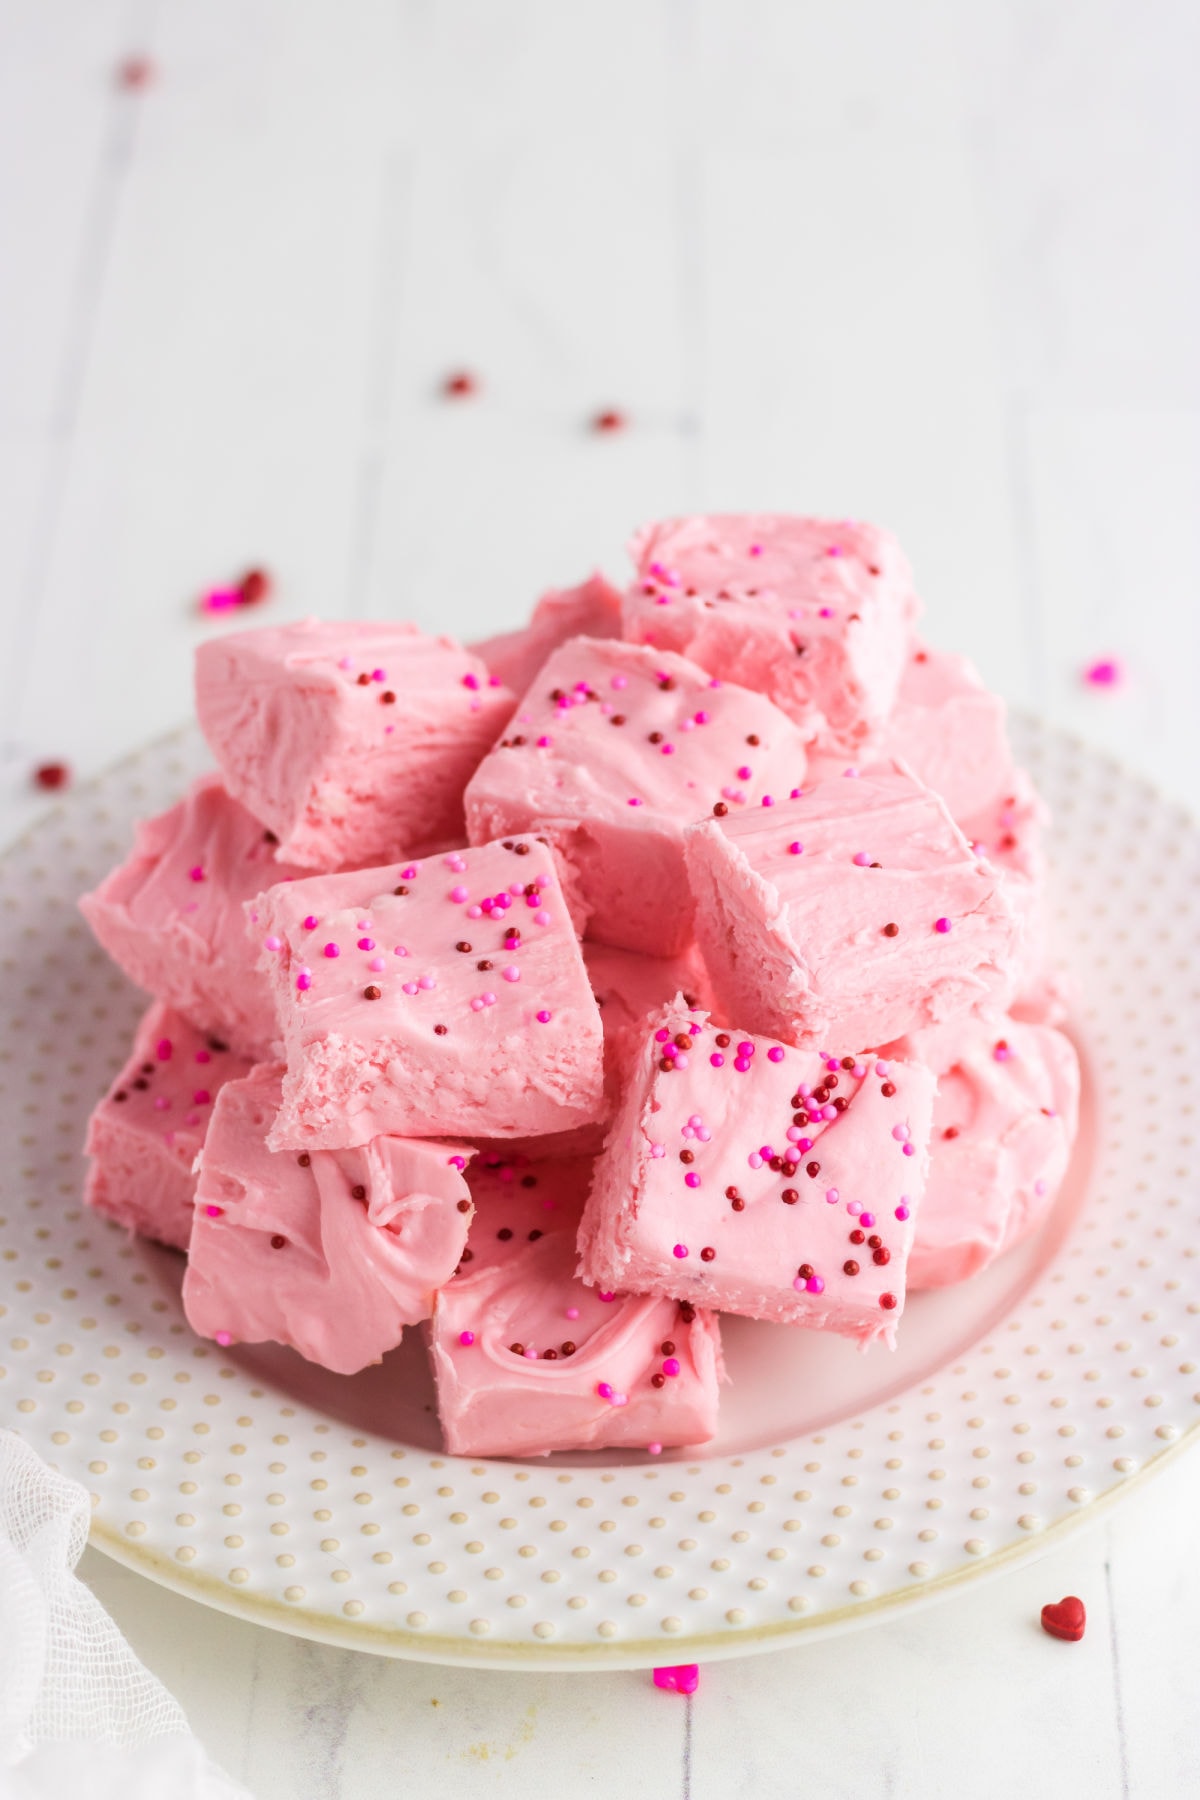 A plateful of strawberry fudge with sprinkles.